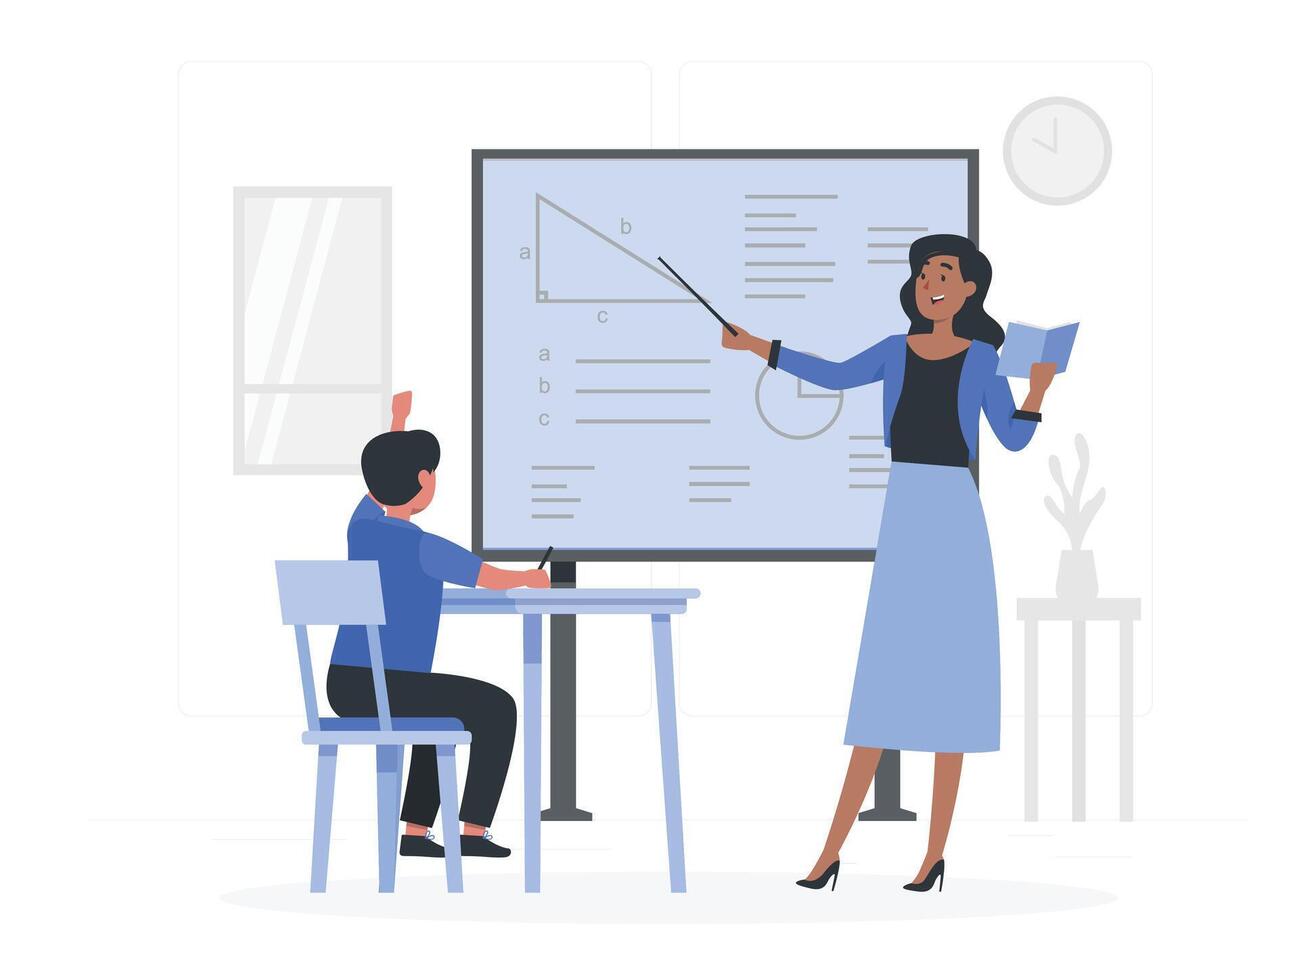 Teacher and student at the blackboard. Vector illustration in flat style.